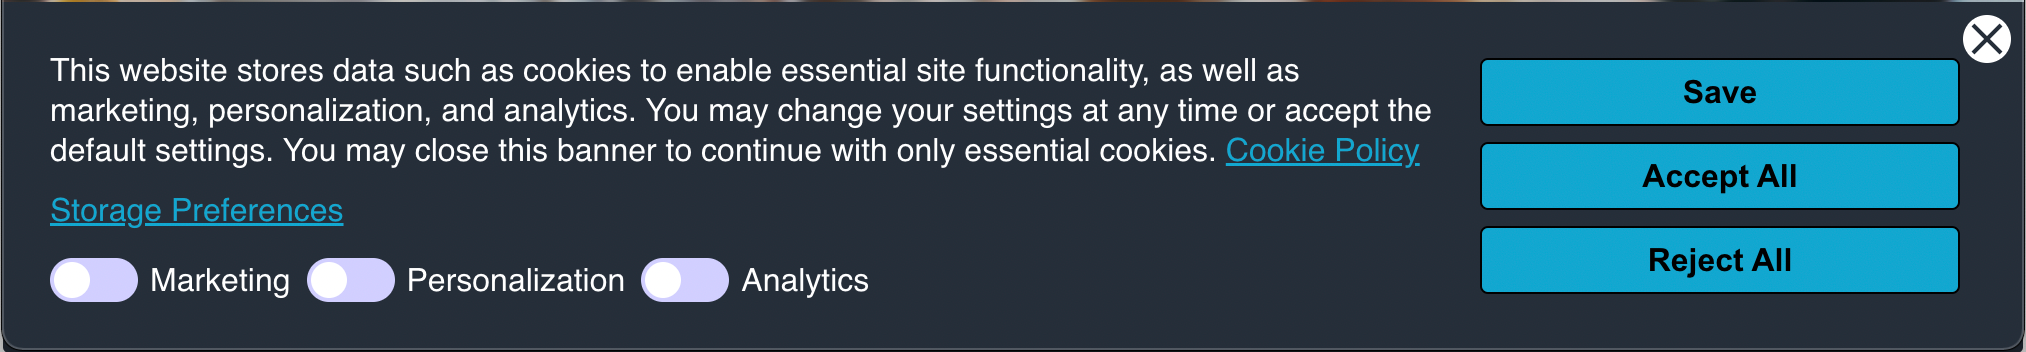 Image of Osano's cookie banner for GDPR. It reads, "This website stores data such as cookies to enable essential site functionality, as well as marketing, personalization, and analytics. You may change your settings at any time or accept the default settings. You may close this banner to continue with only essential cookies. [Link to Cookie Policy]. Below this is a link to "Storage Preferences" and three toggles to turn "Marketing," "Personalization" and "Analytics" cookies on or off. To the right are three buttons to "Save," "Accept All," or "Reject All."